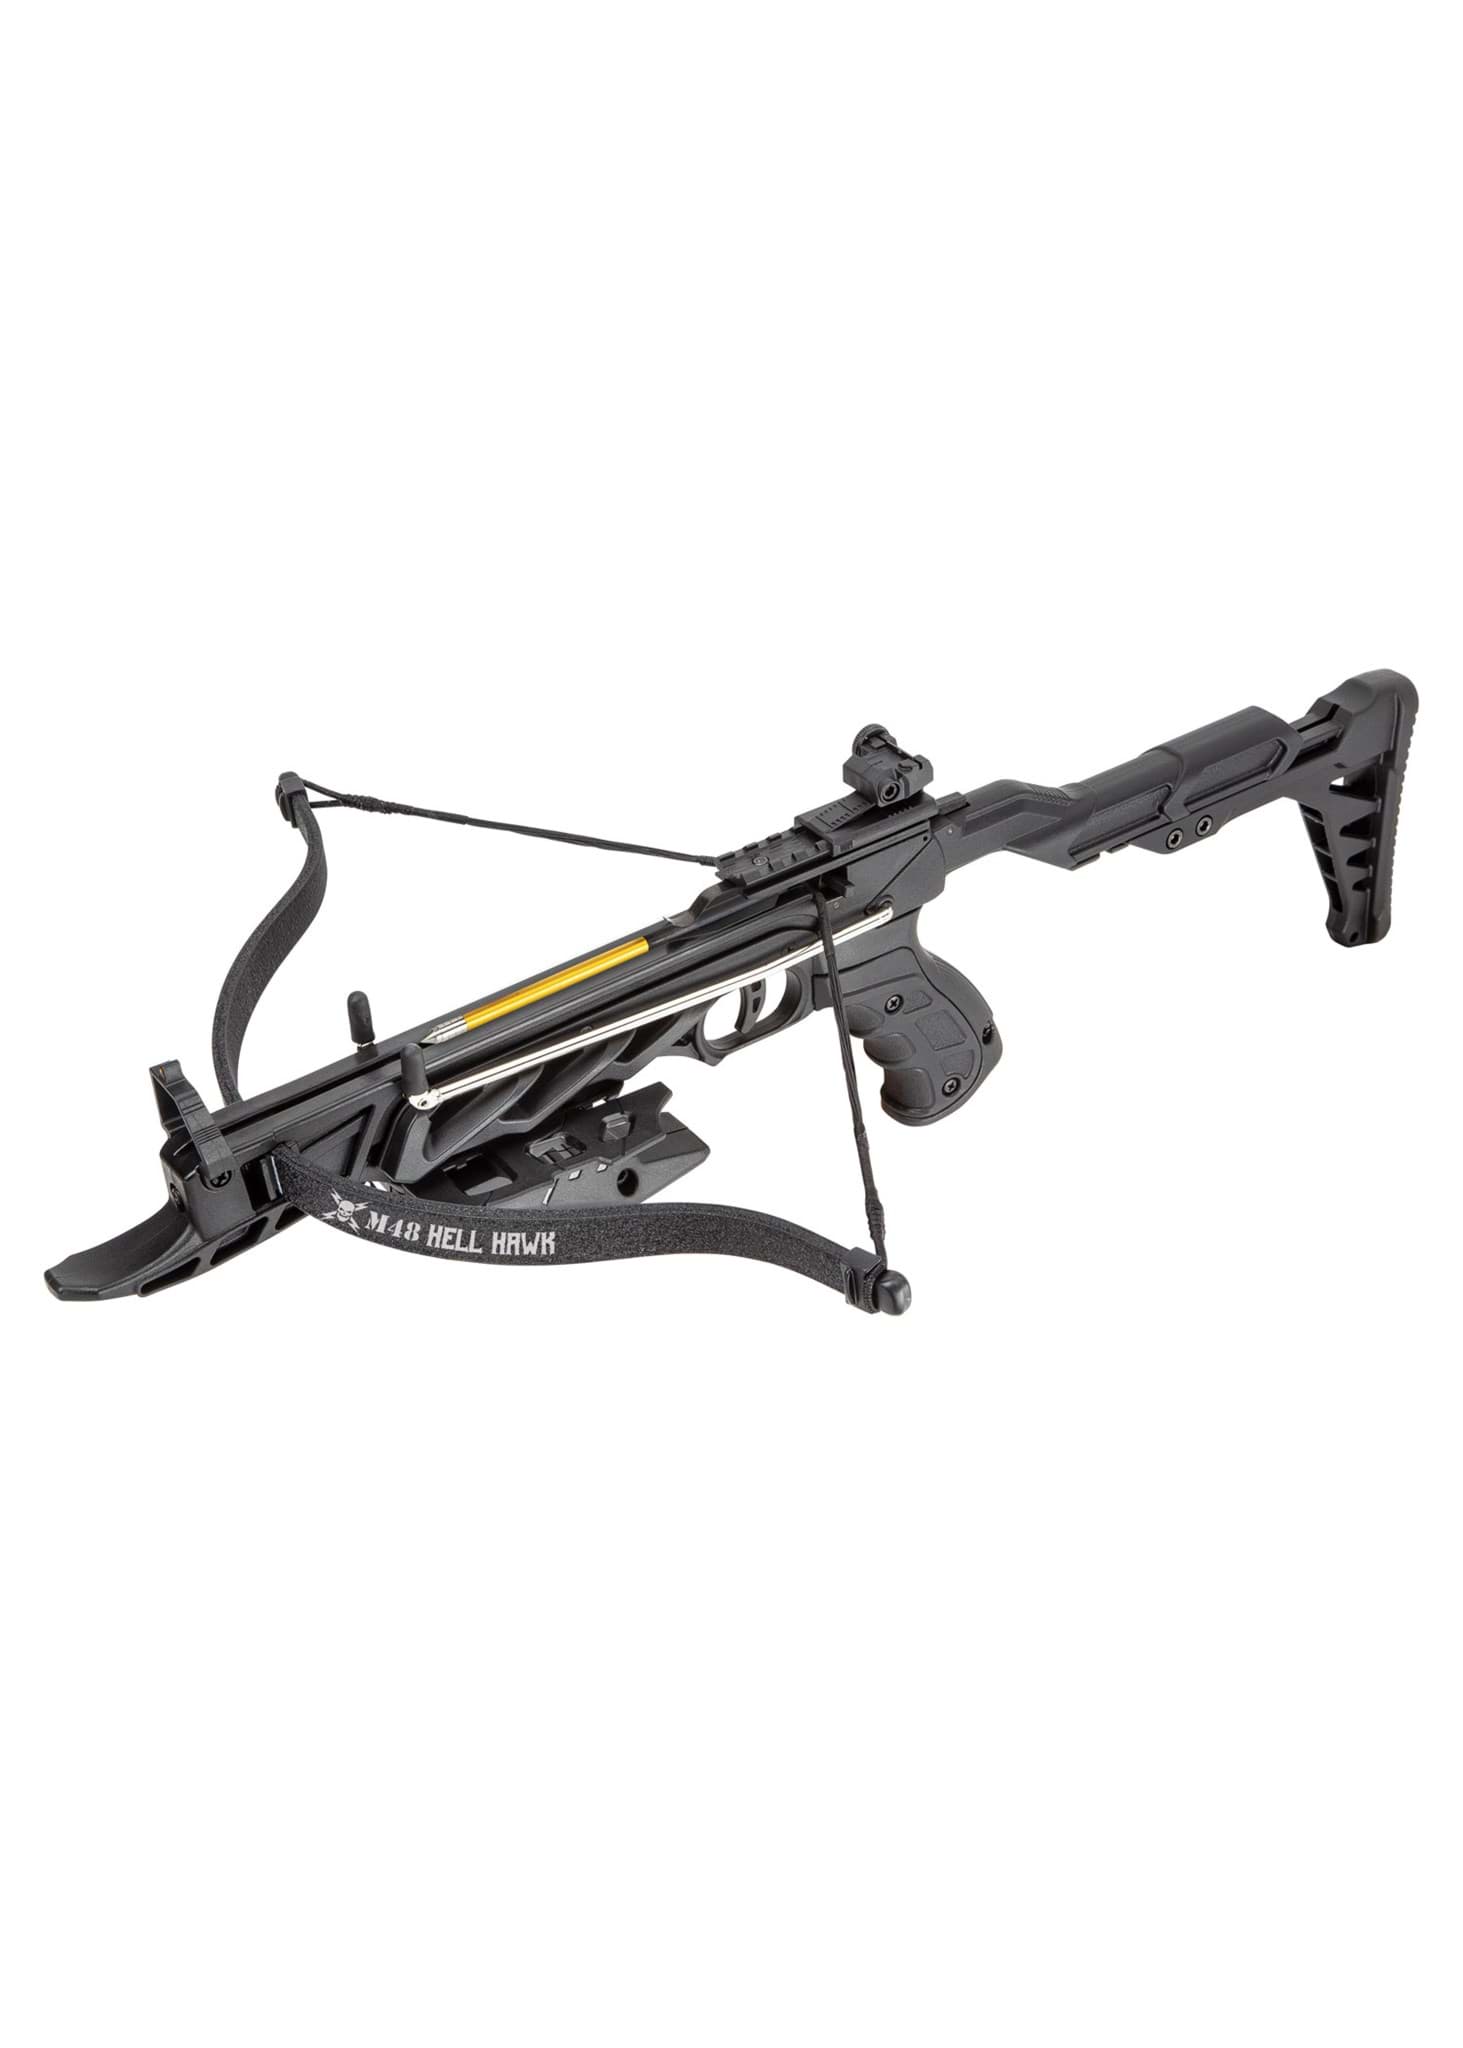 Picture of United Cutlery - M48 Hell Hawk 80 lbs Crossbow Pistol